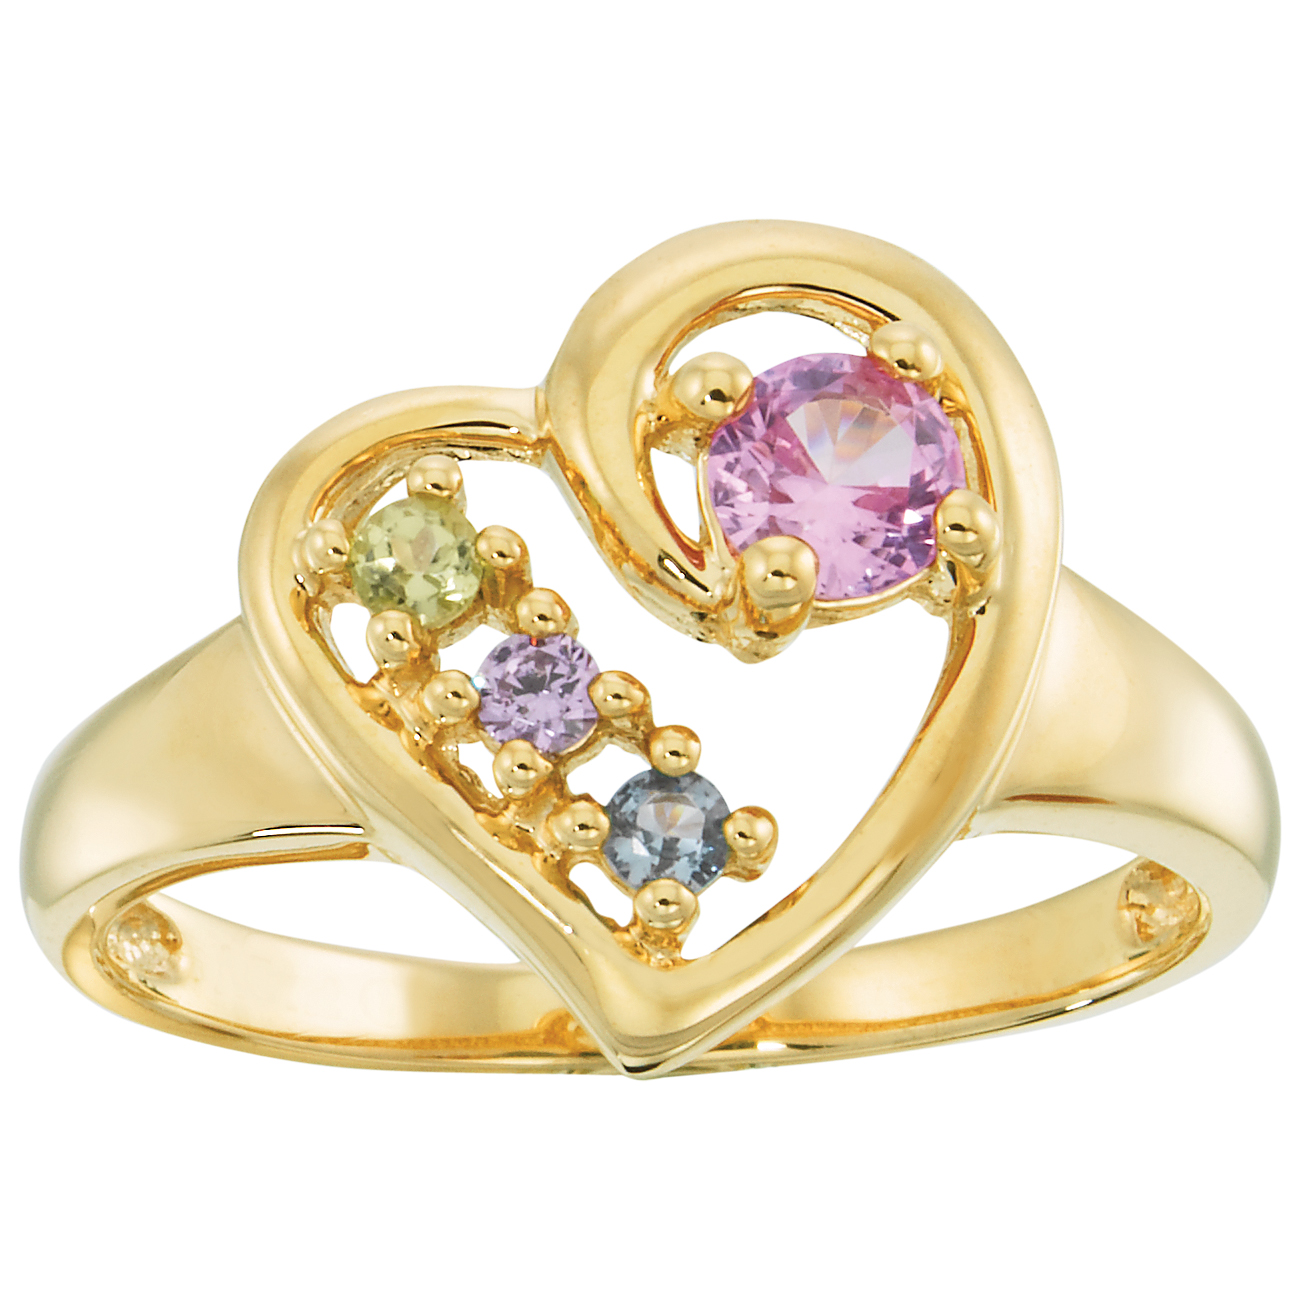 Image of Heart-Shaped Ring with 4-Stones: Inamorata